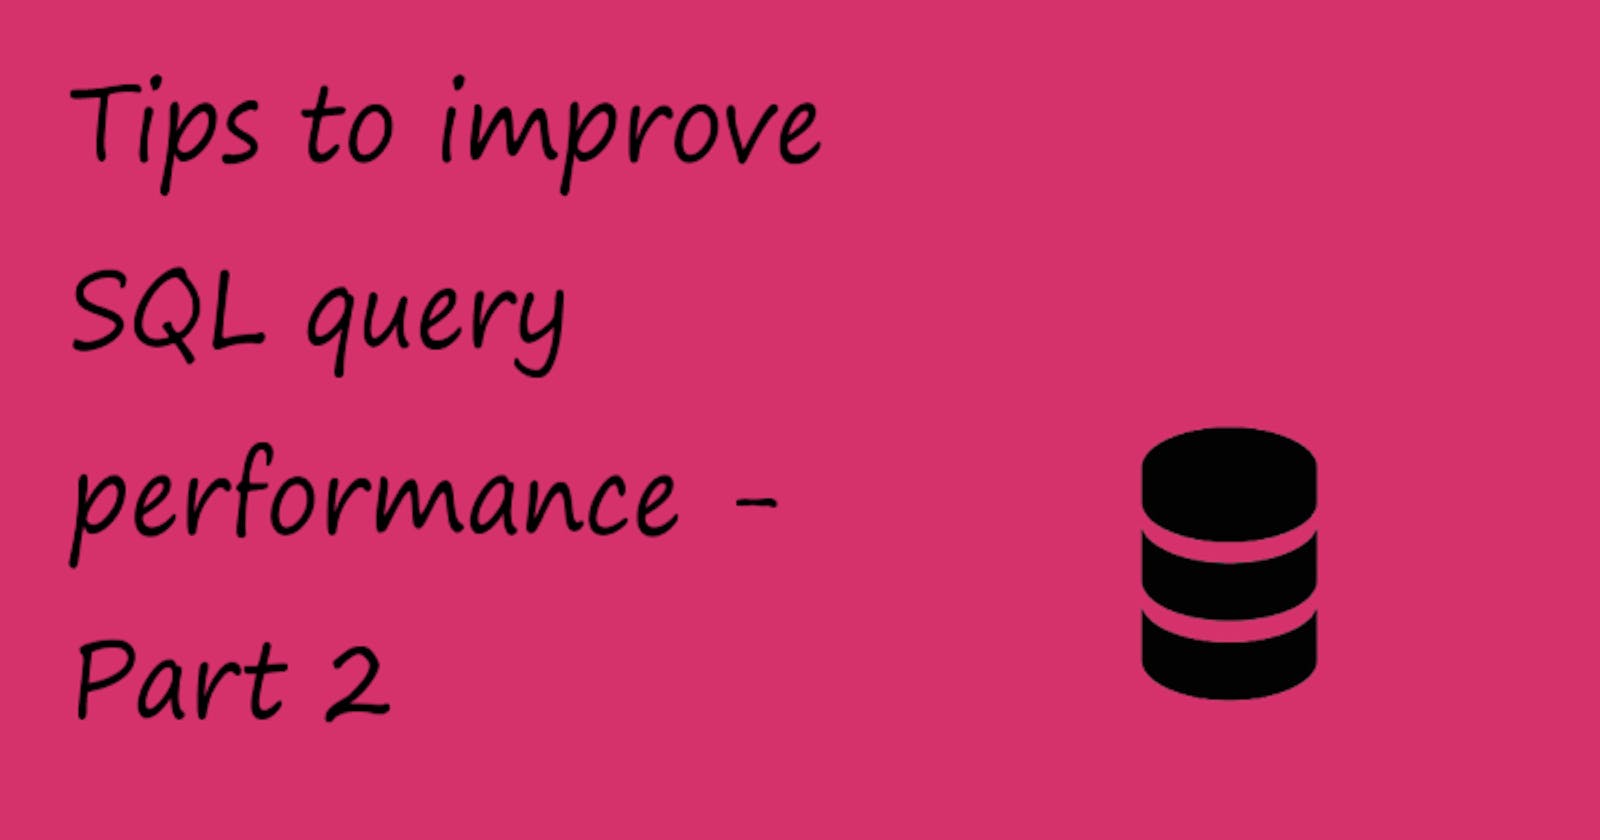 Improve the performance of SQL queries - Part II